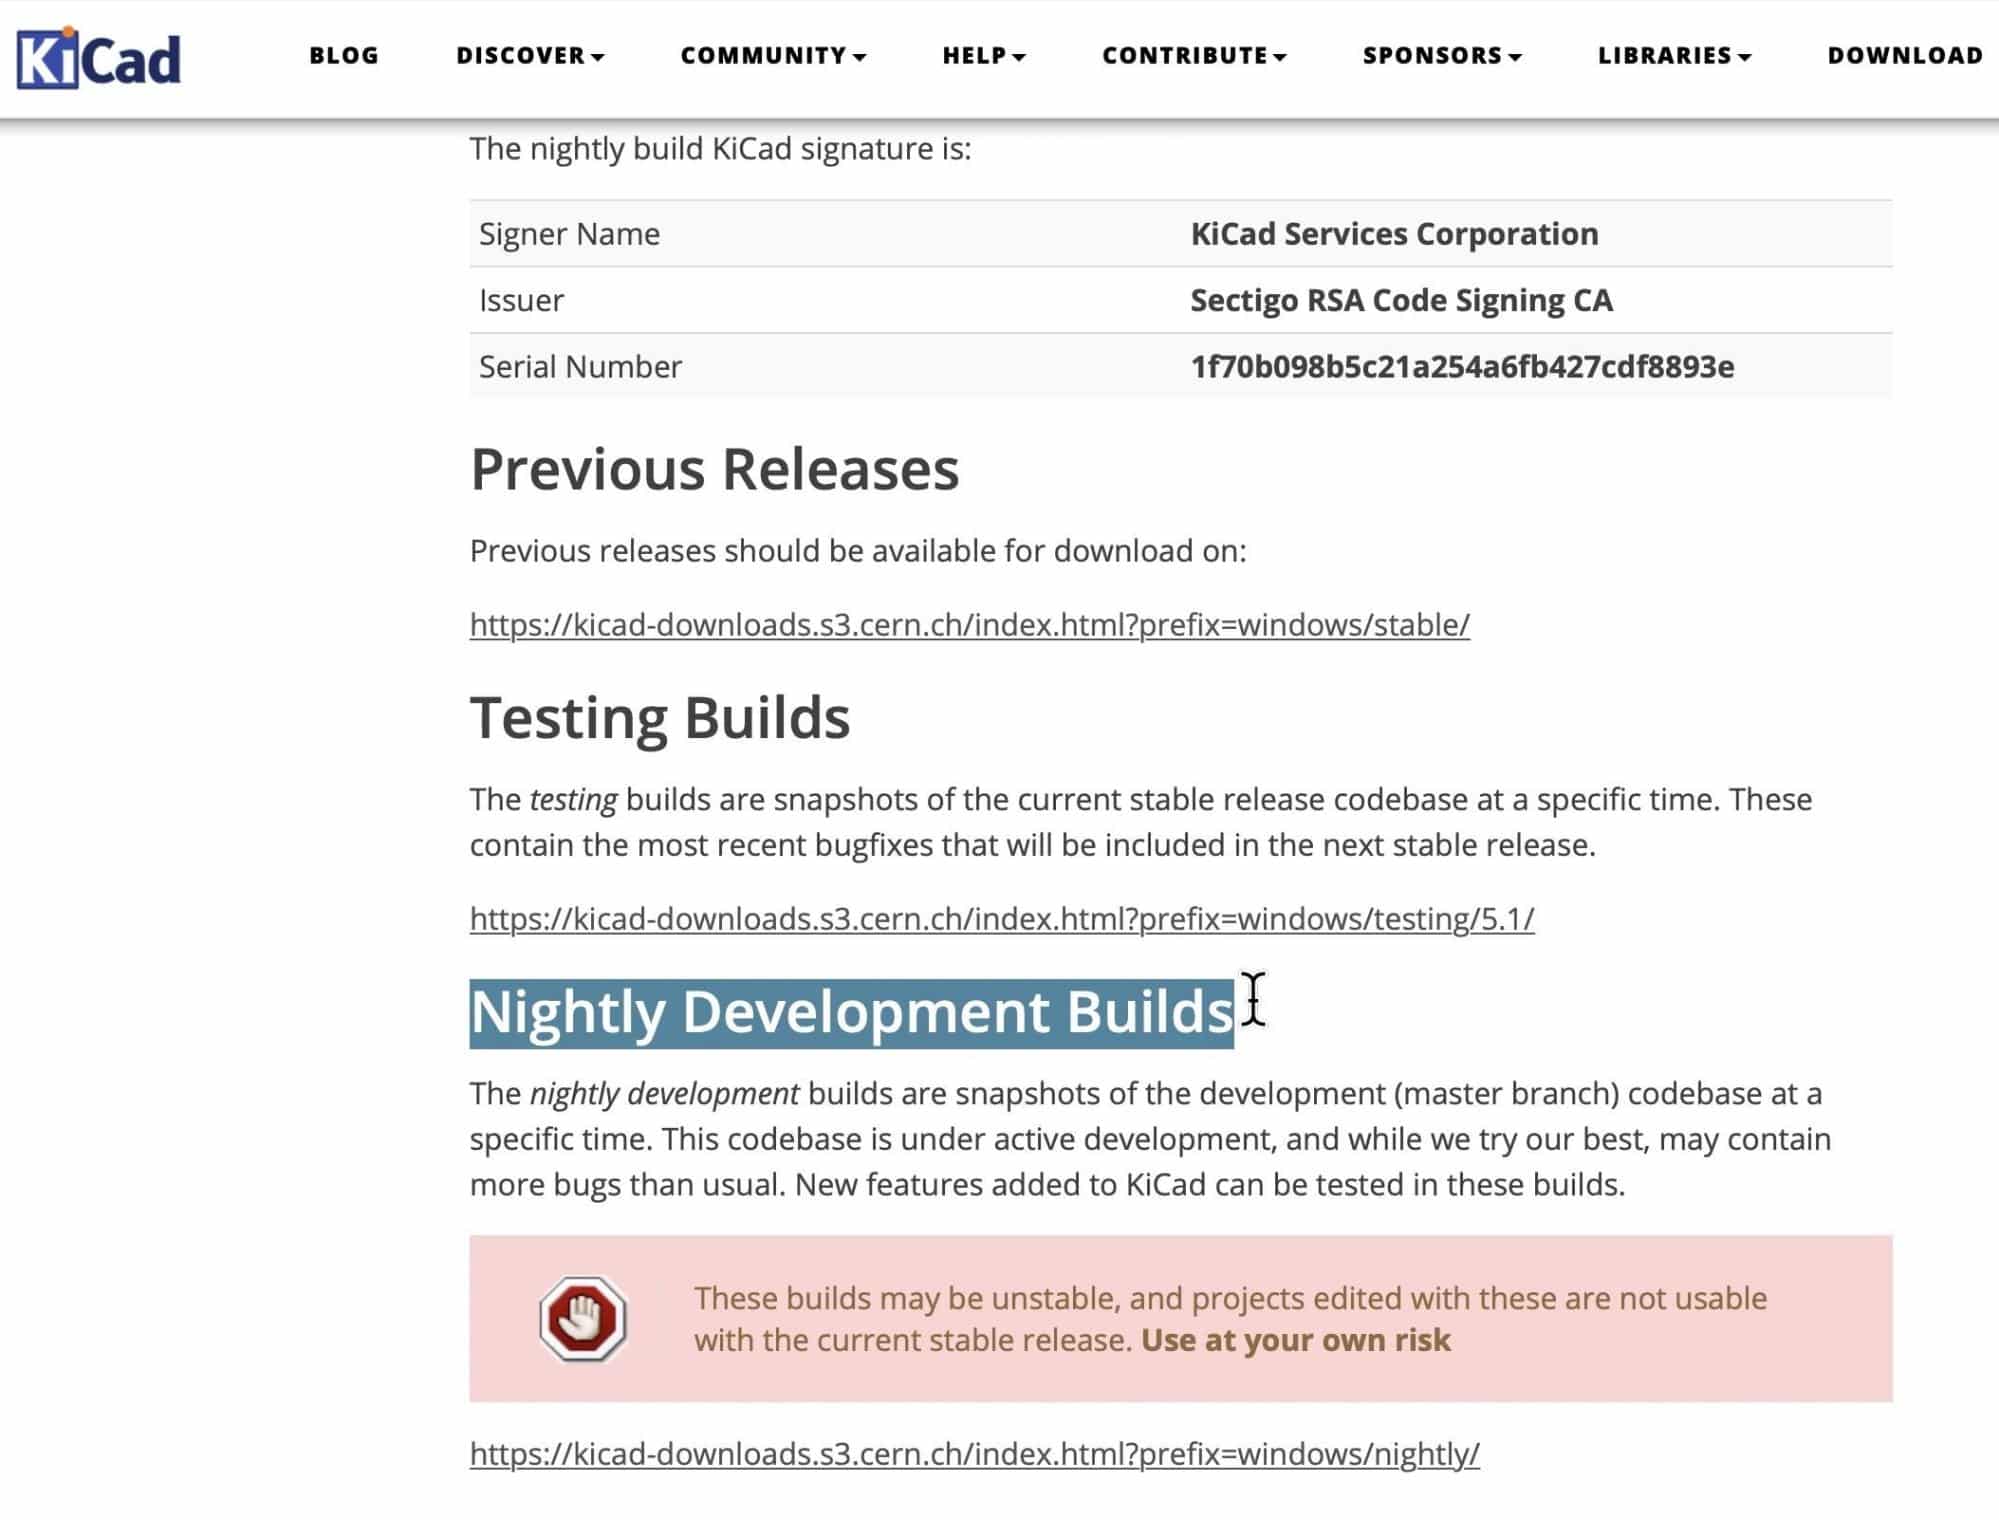 Figure 1.4.2: Nightly build download